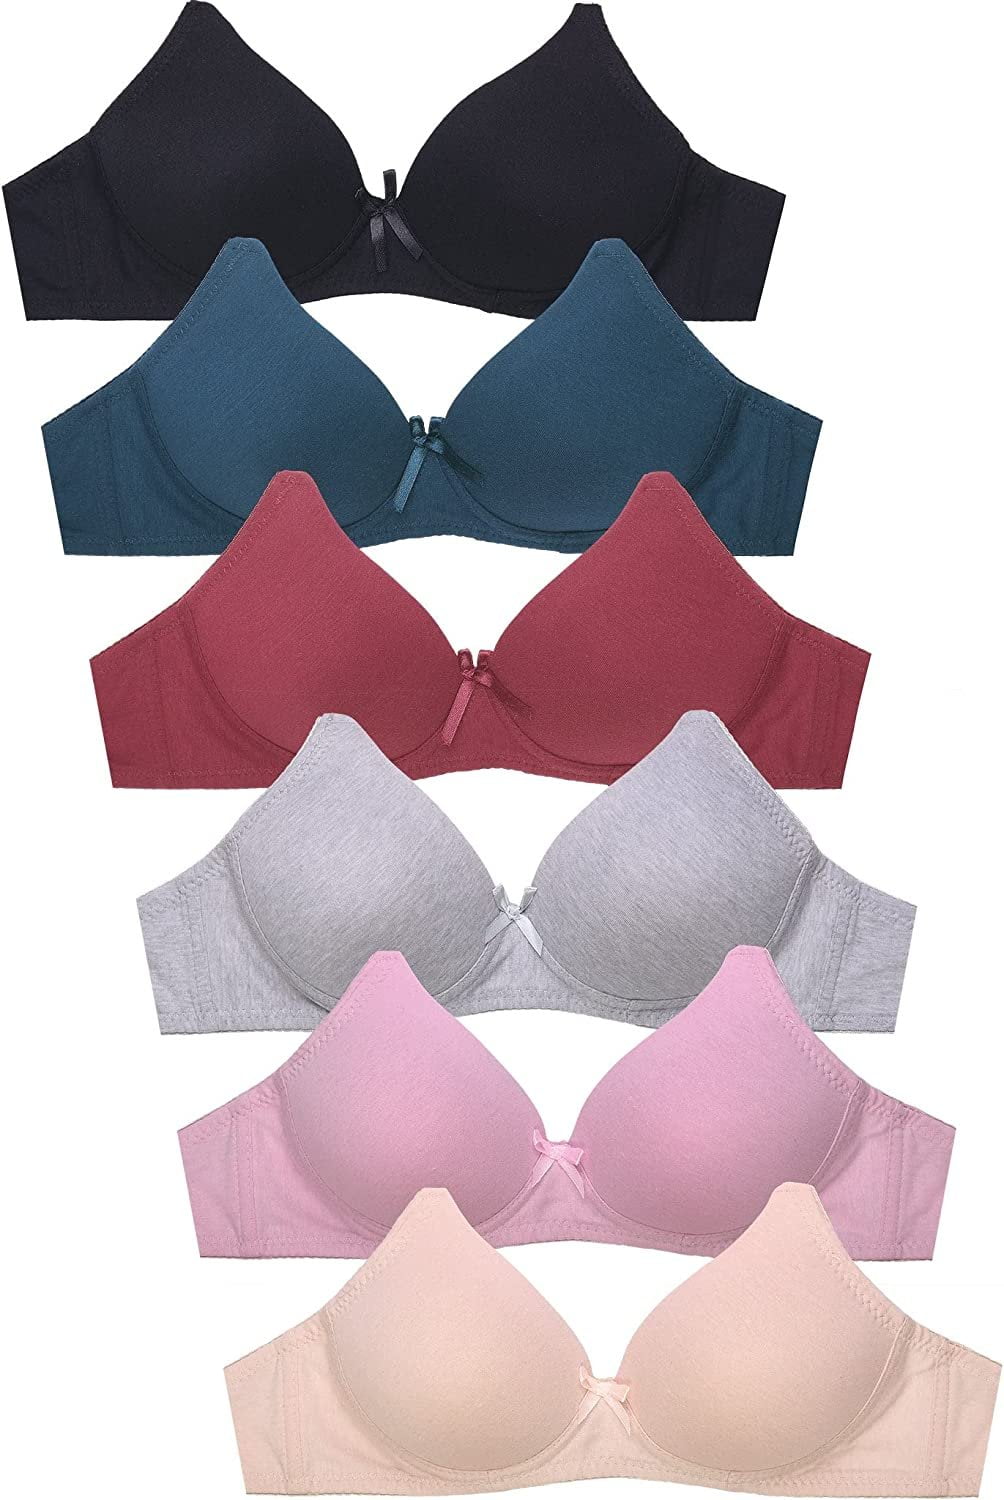 Mamia & Sofra IN-BR4324LPU-36C Lace Push Up Bra - Size 36C - Pack of 6 